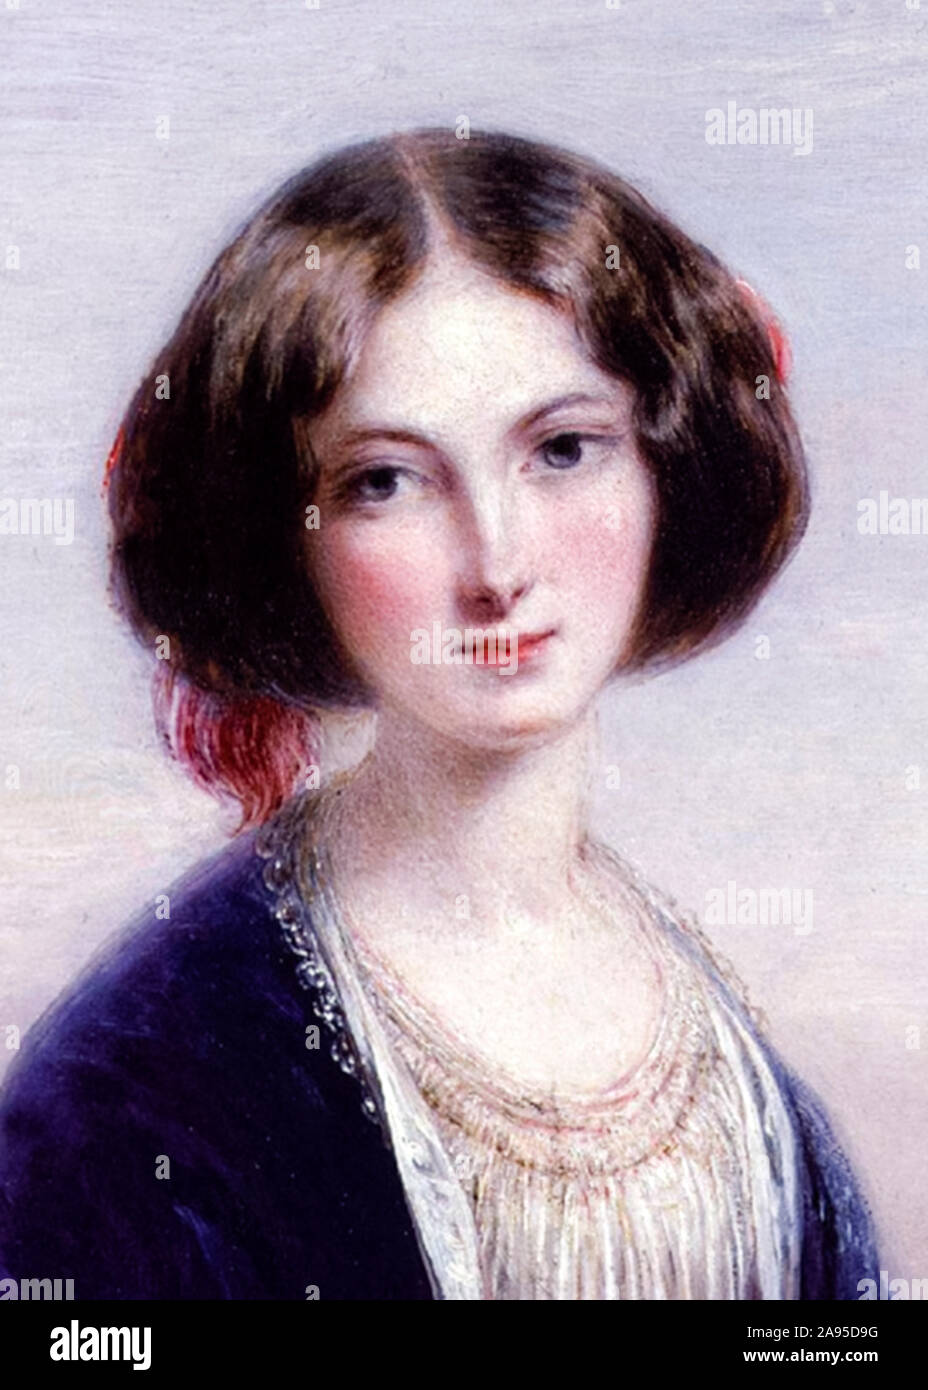 Effie Gray (Lady Millais) who married critic John Ruskin (1819-1900) before modelling for and eventually marrying the Pre-Raphaelite painter John Everett Millais (1829-1896). Detail from 1851 painting by Thomas Richmond (1802-1874). Stock Photo